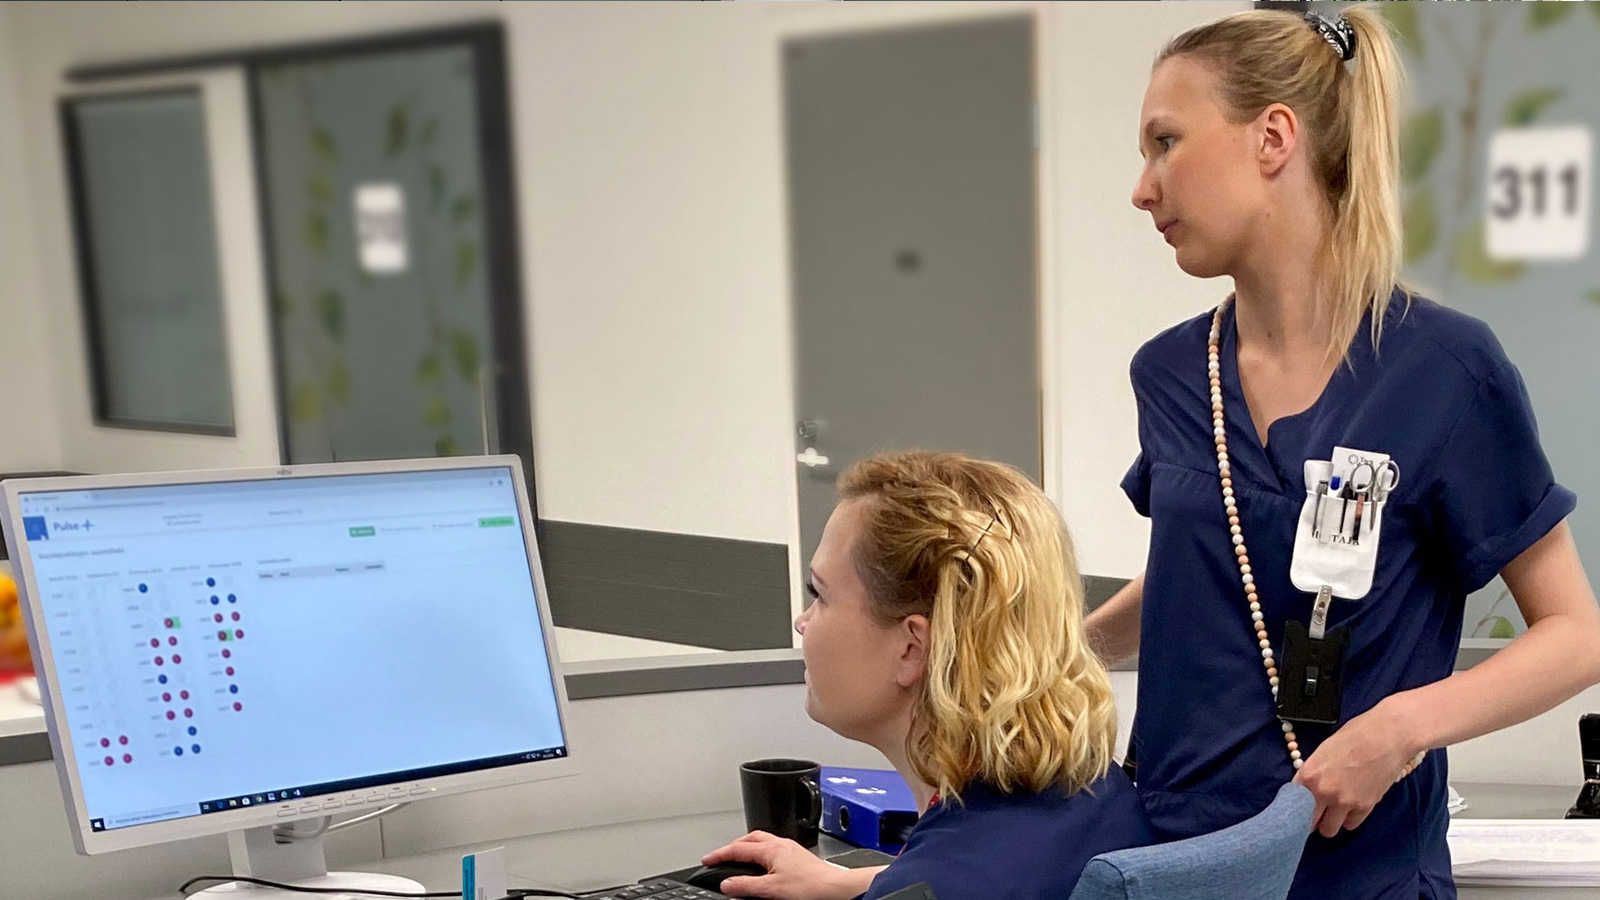 Smoother daily operations, increasingly satisfied nurses – Pulse speeds up activities at the Valkeakoski hospital